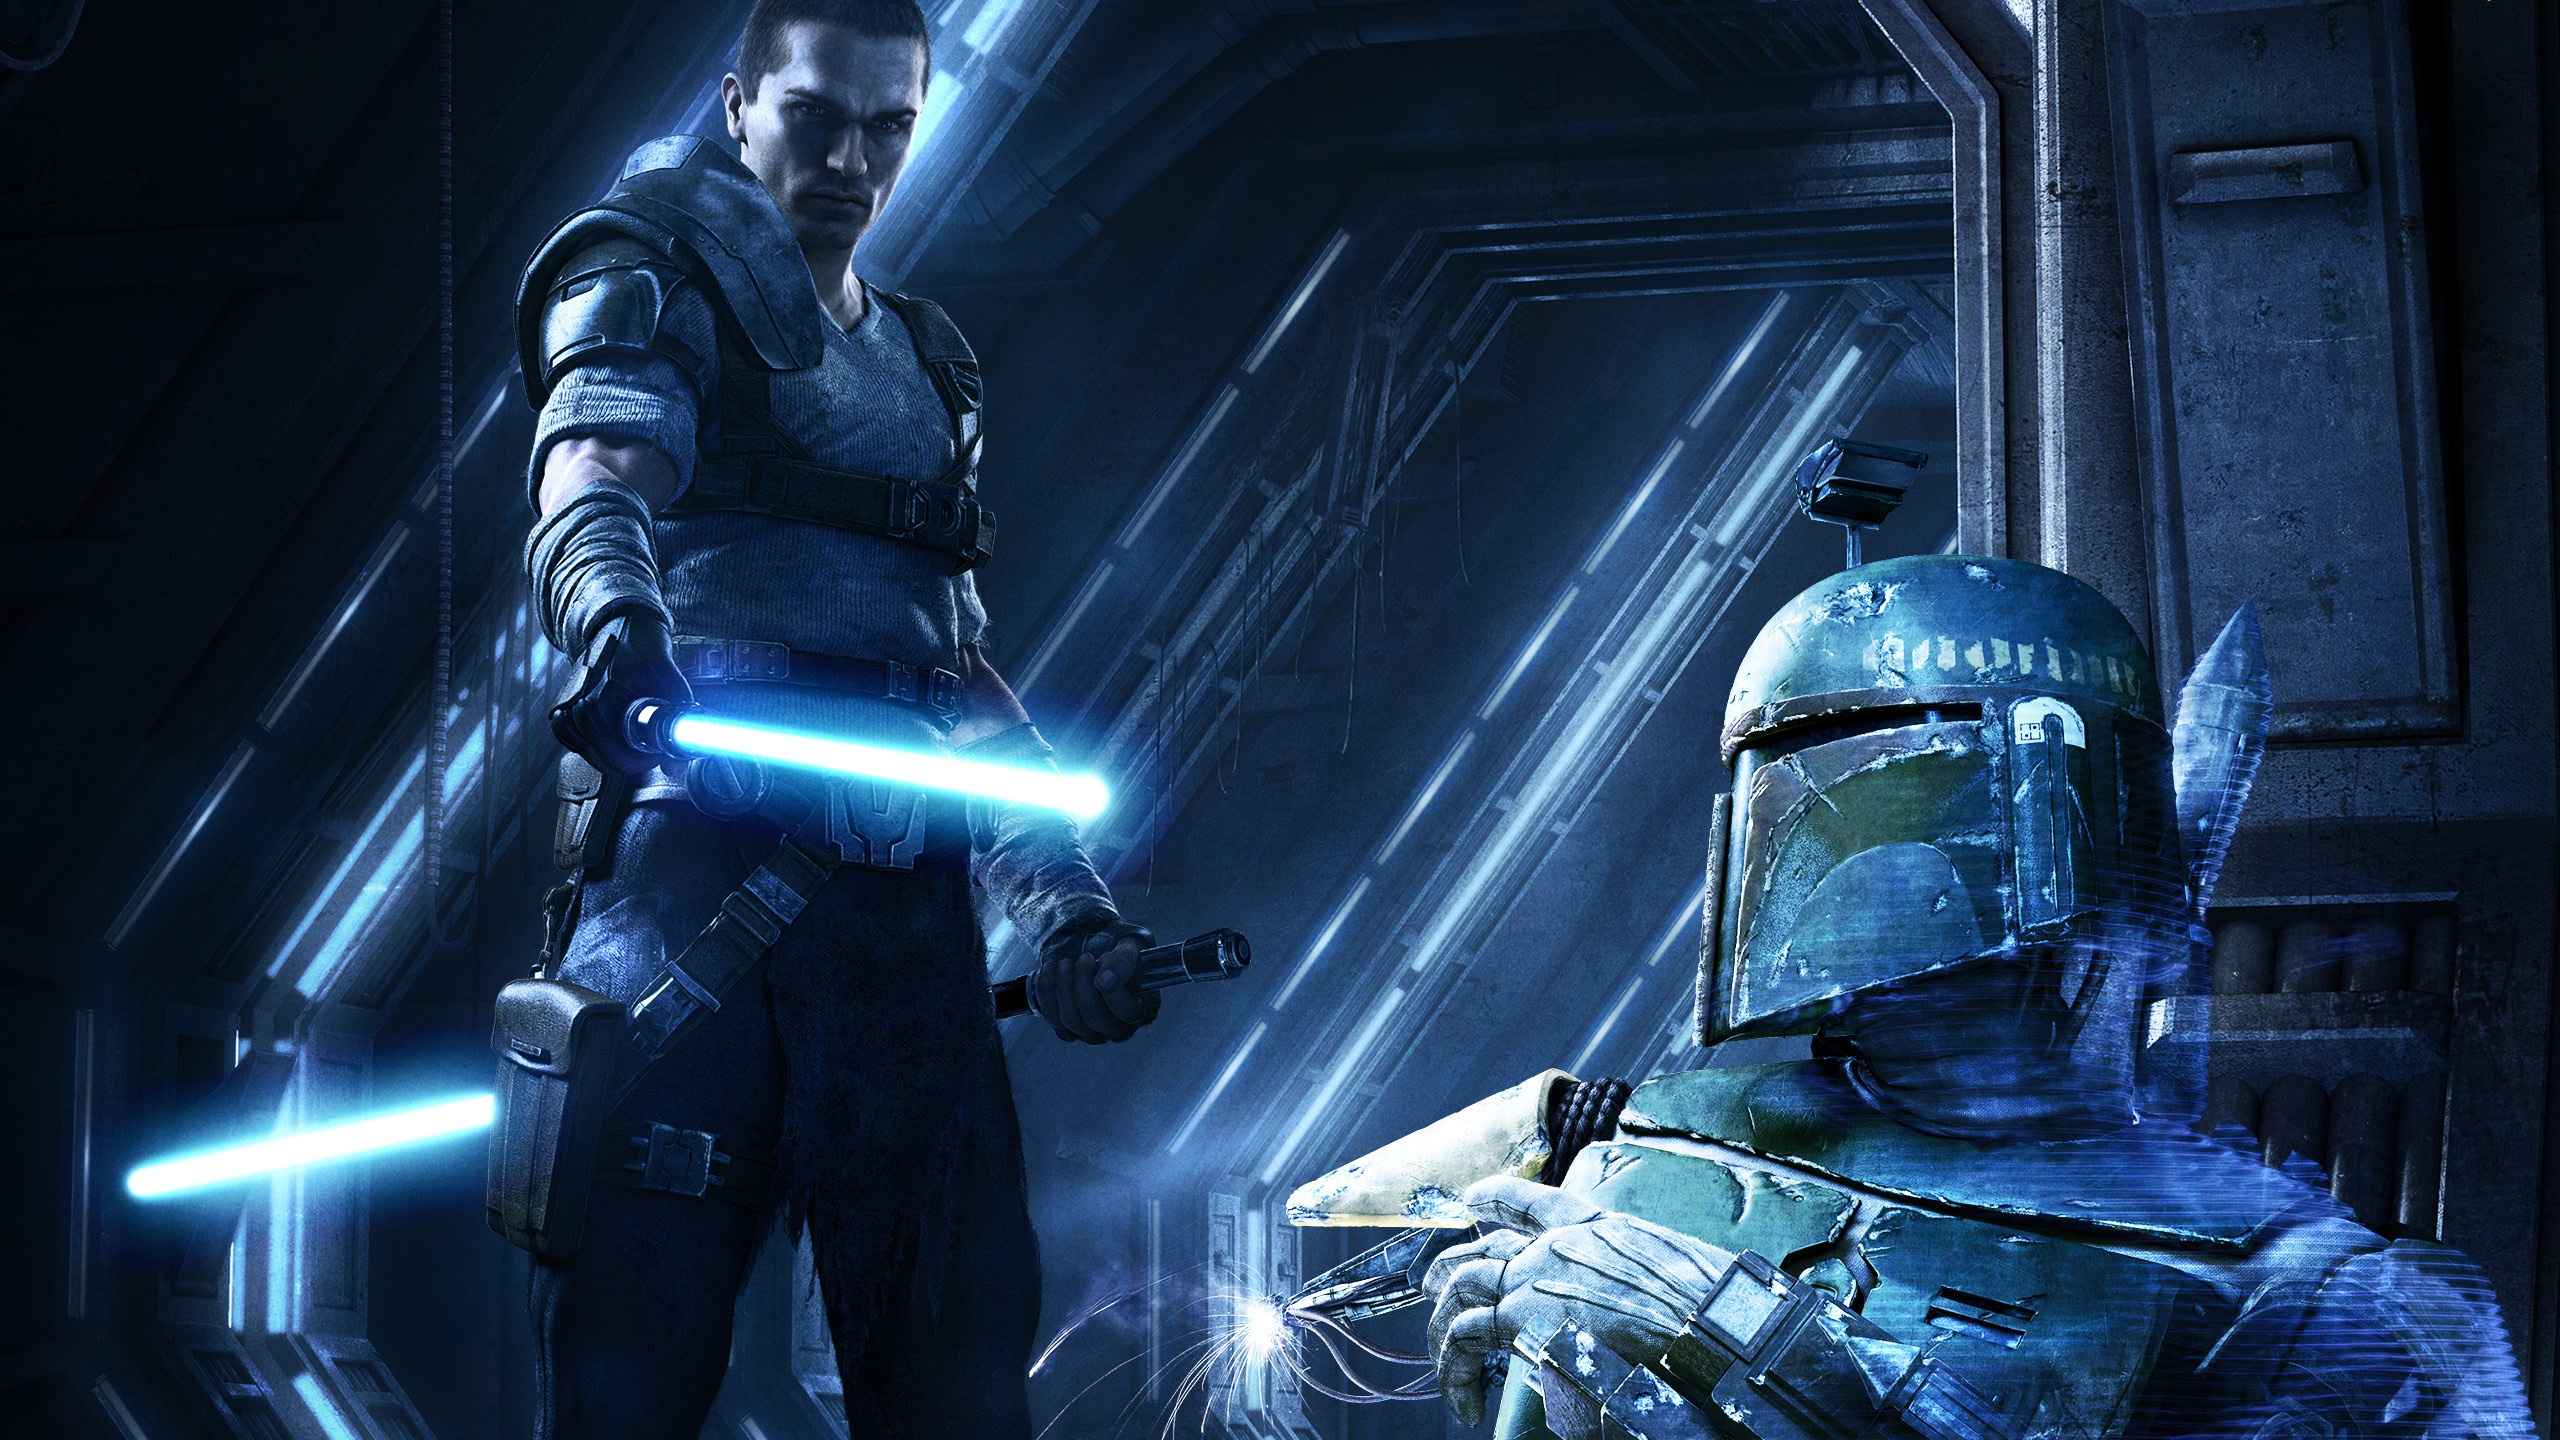 Free download 2560x1440 Star Wars Force Unleashed 2 desktop PC and Mac wallpaper [2560x1440] for your Desktop, Mobile & Tablet. Explore Star Wars 1440p Wallpaper. Star Wars 1080p Wallpaper